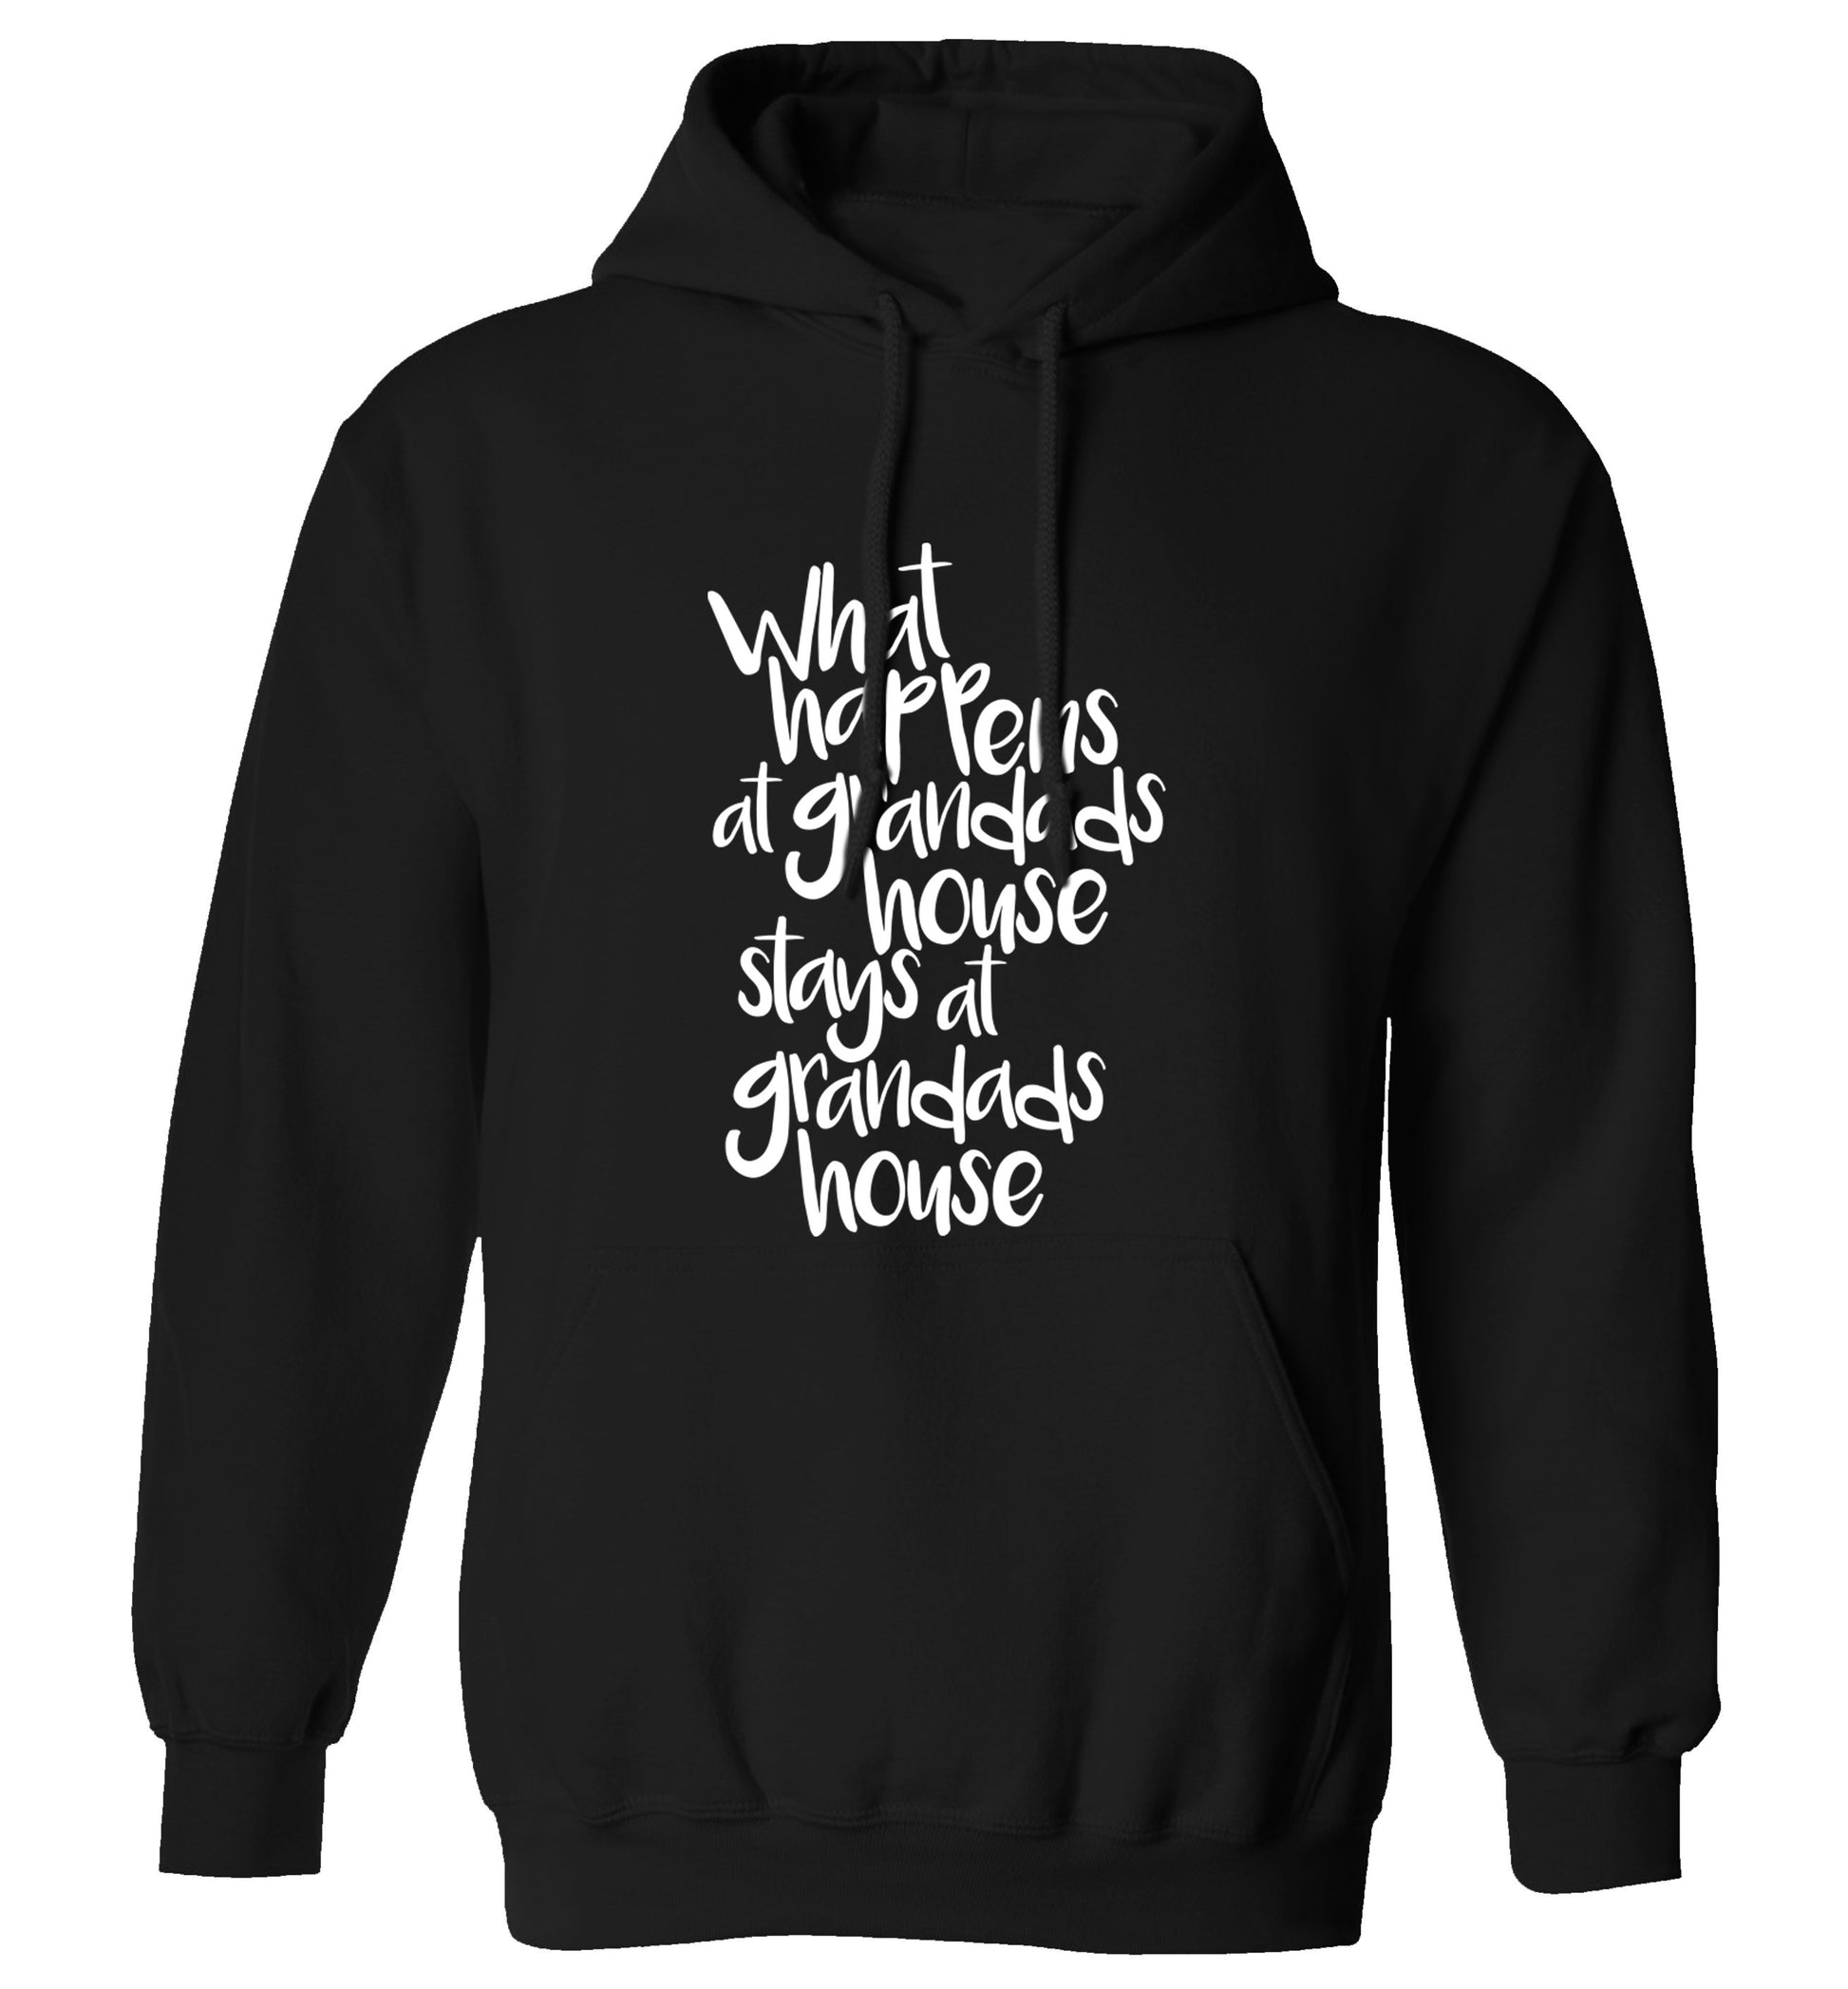 What happens at grandads house stays at grandads house adults unisex black hoodie 2XL